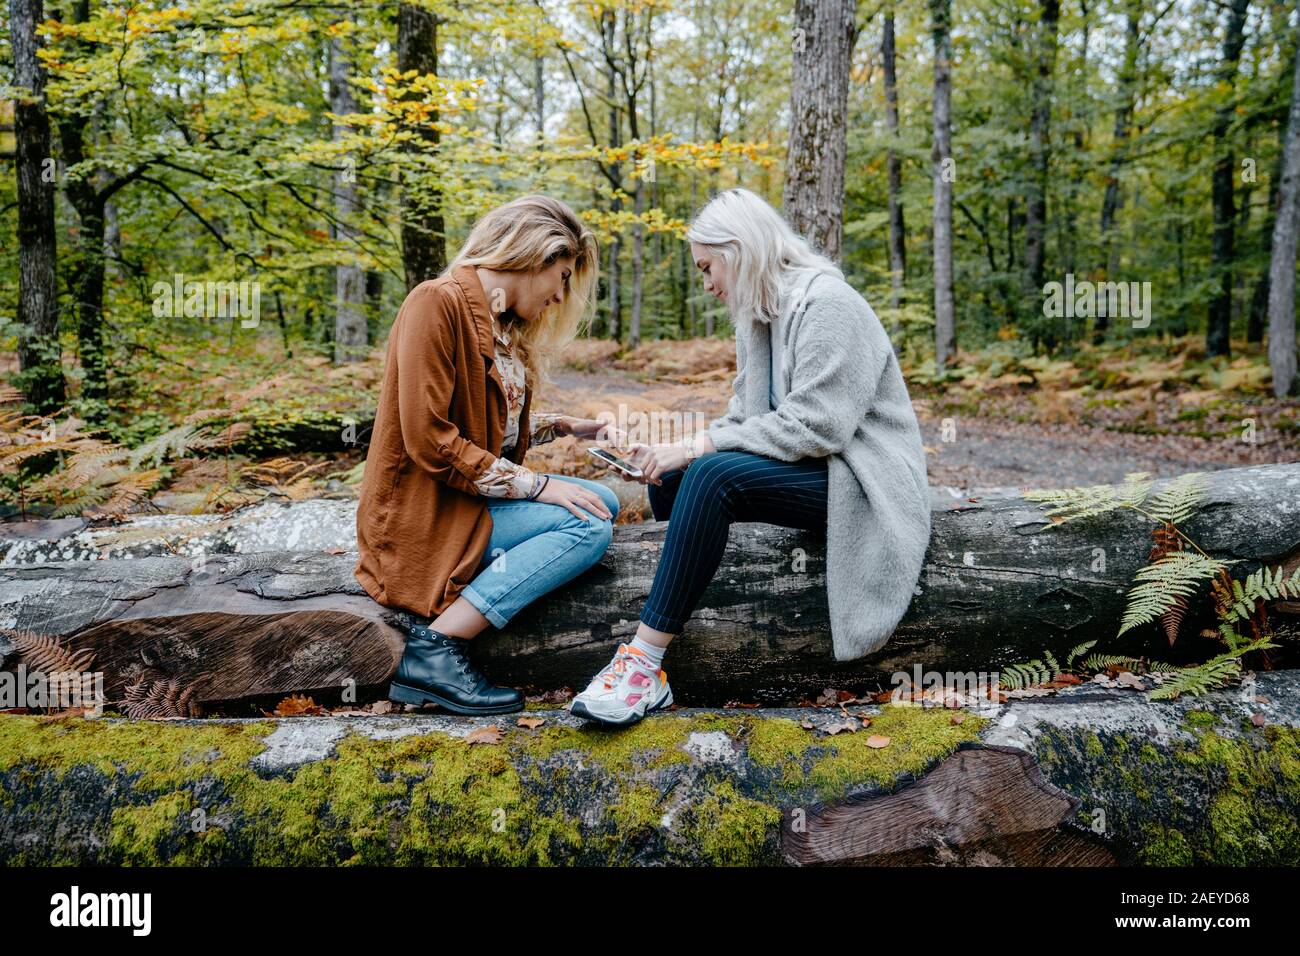 Women using mobile phone in a remote forest Stock Photo